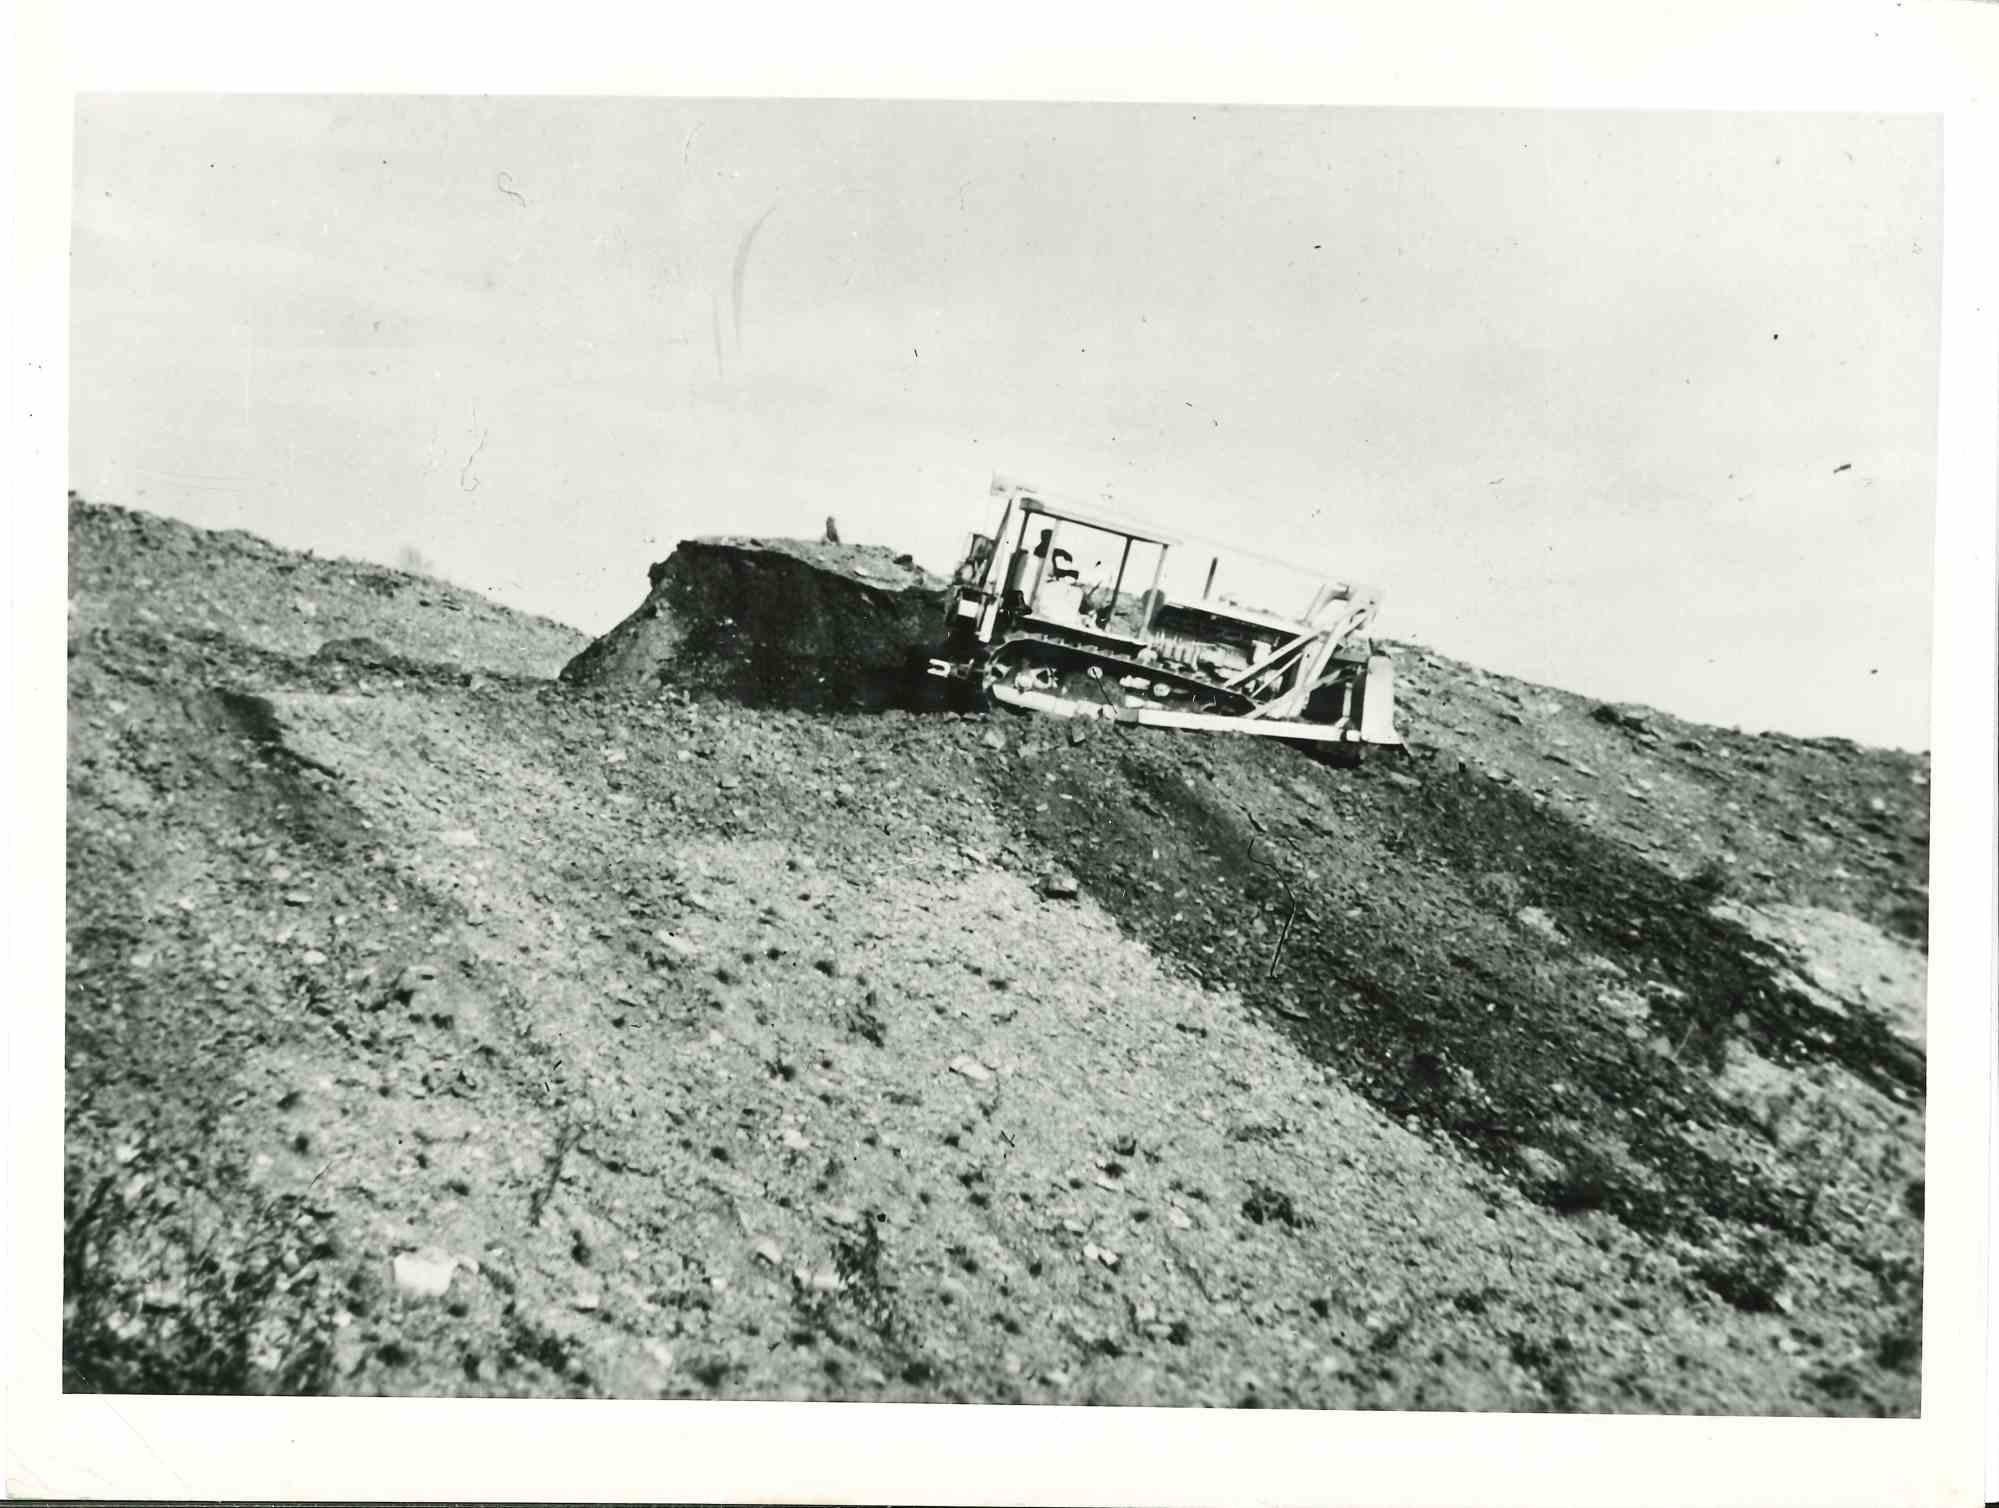 Unknown Figurative Photograph - American Coal Field - American Vintage Photograph - Mid 20th Century